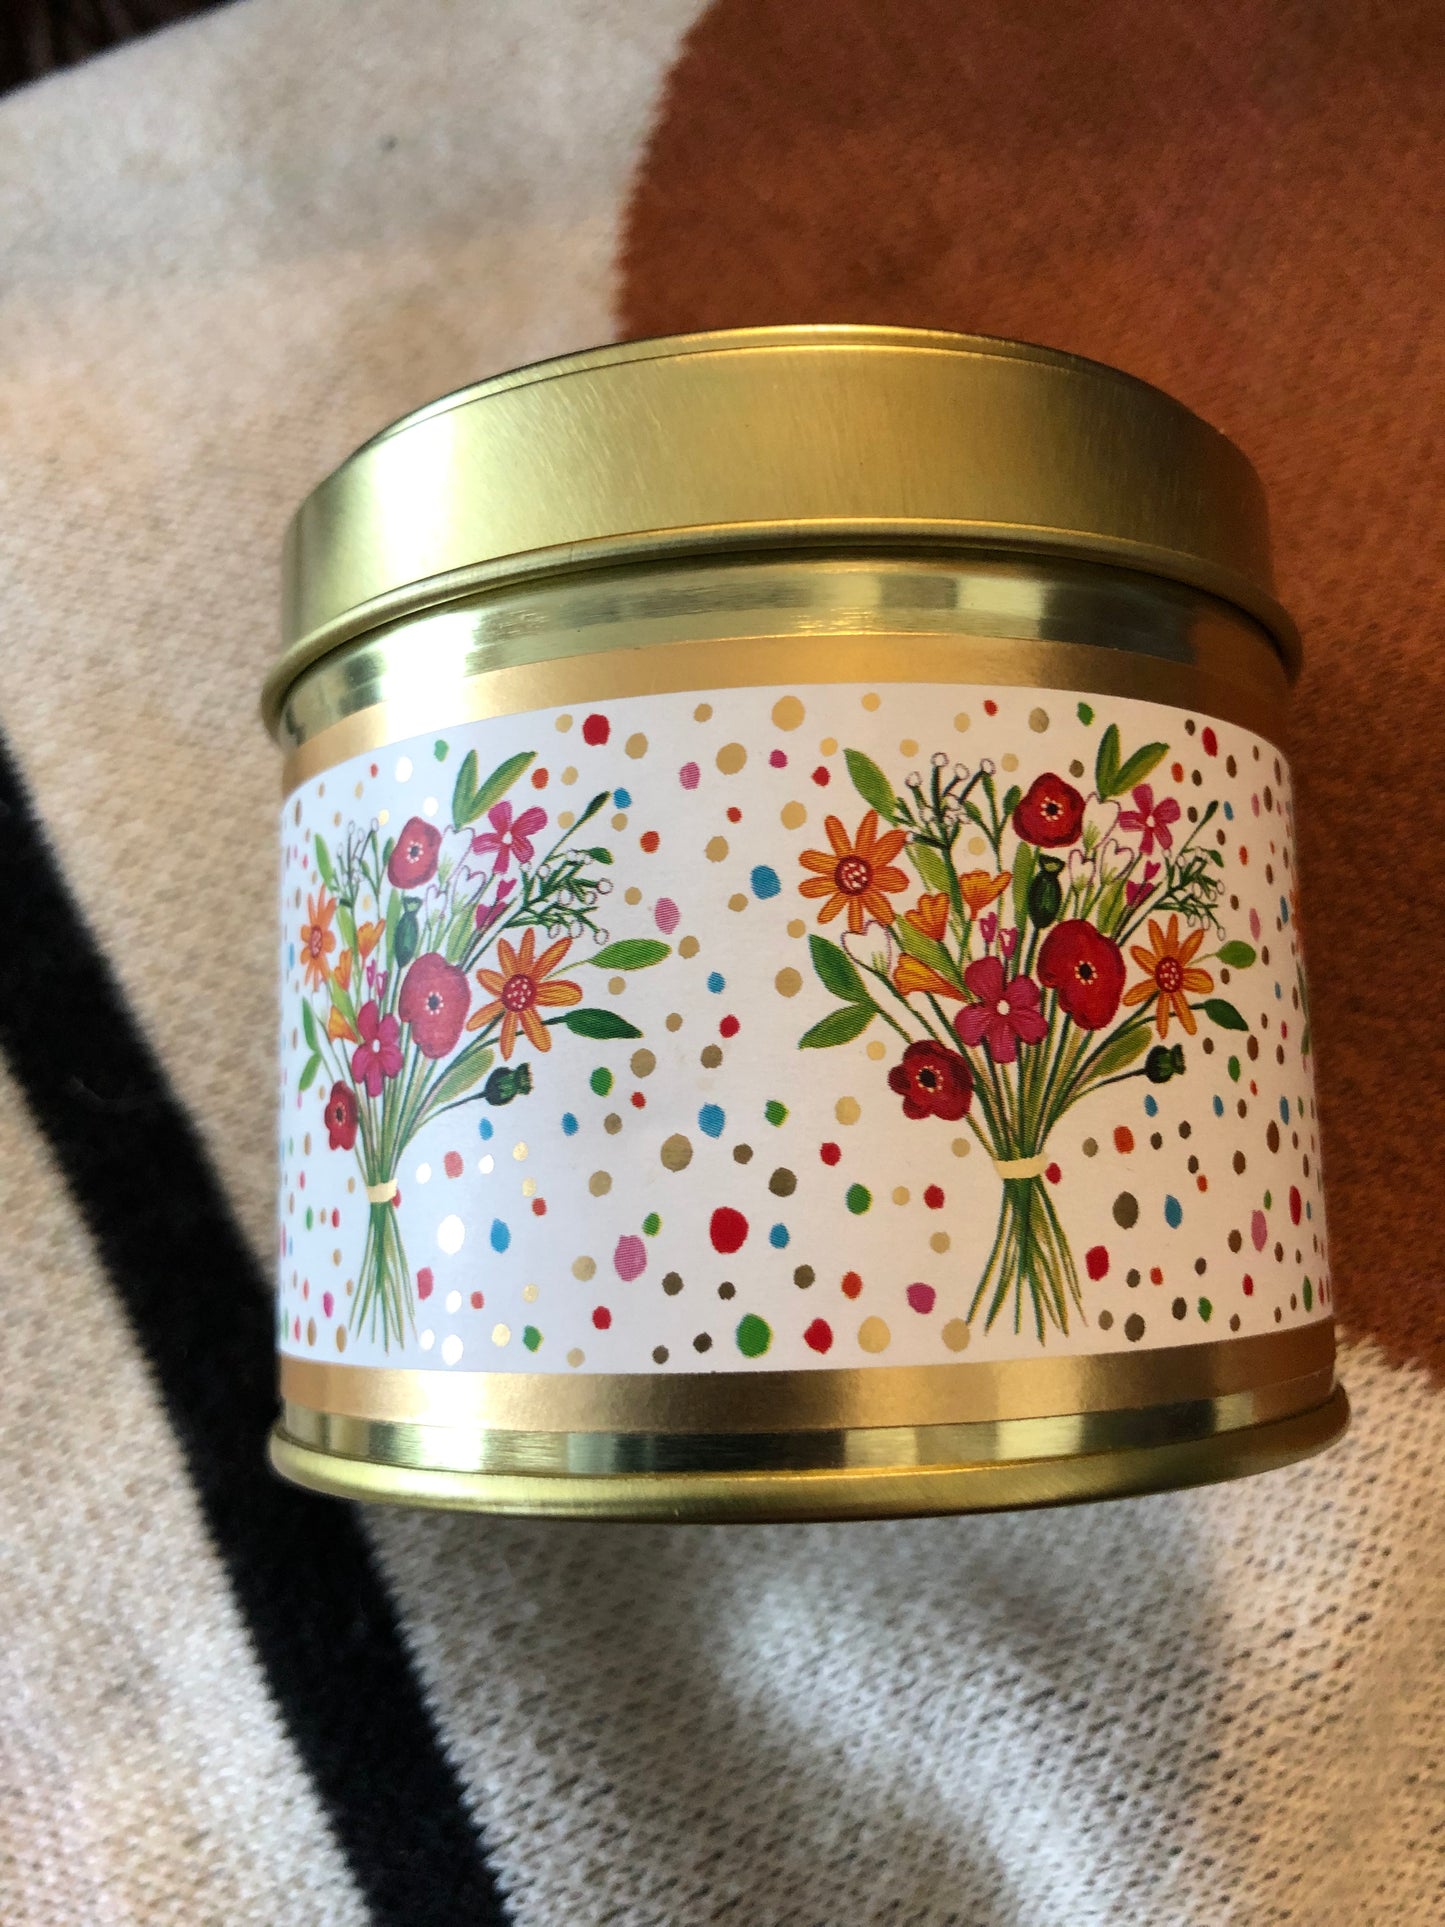 Scented Candle in Tin (Thanks A Million).